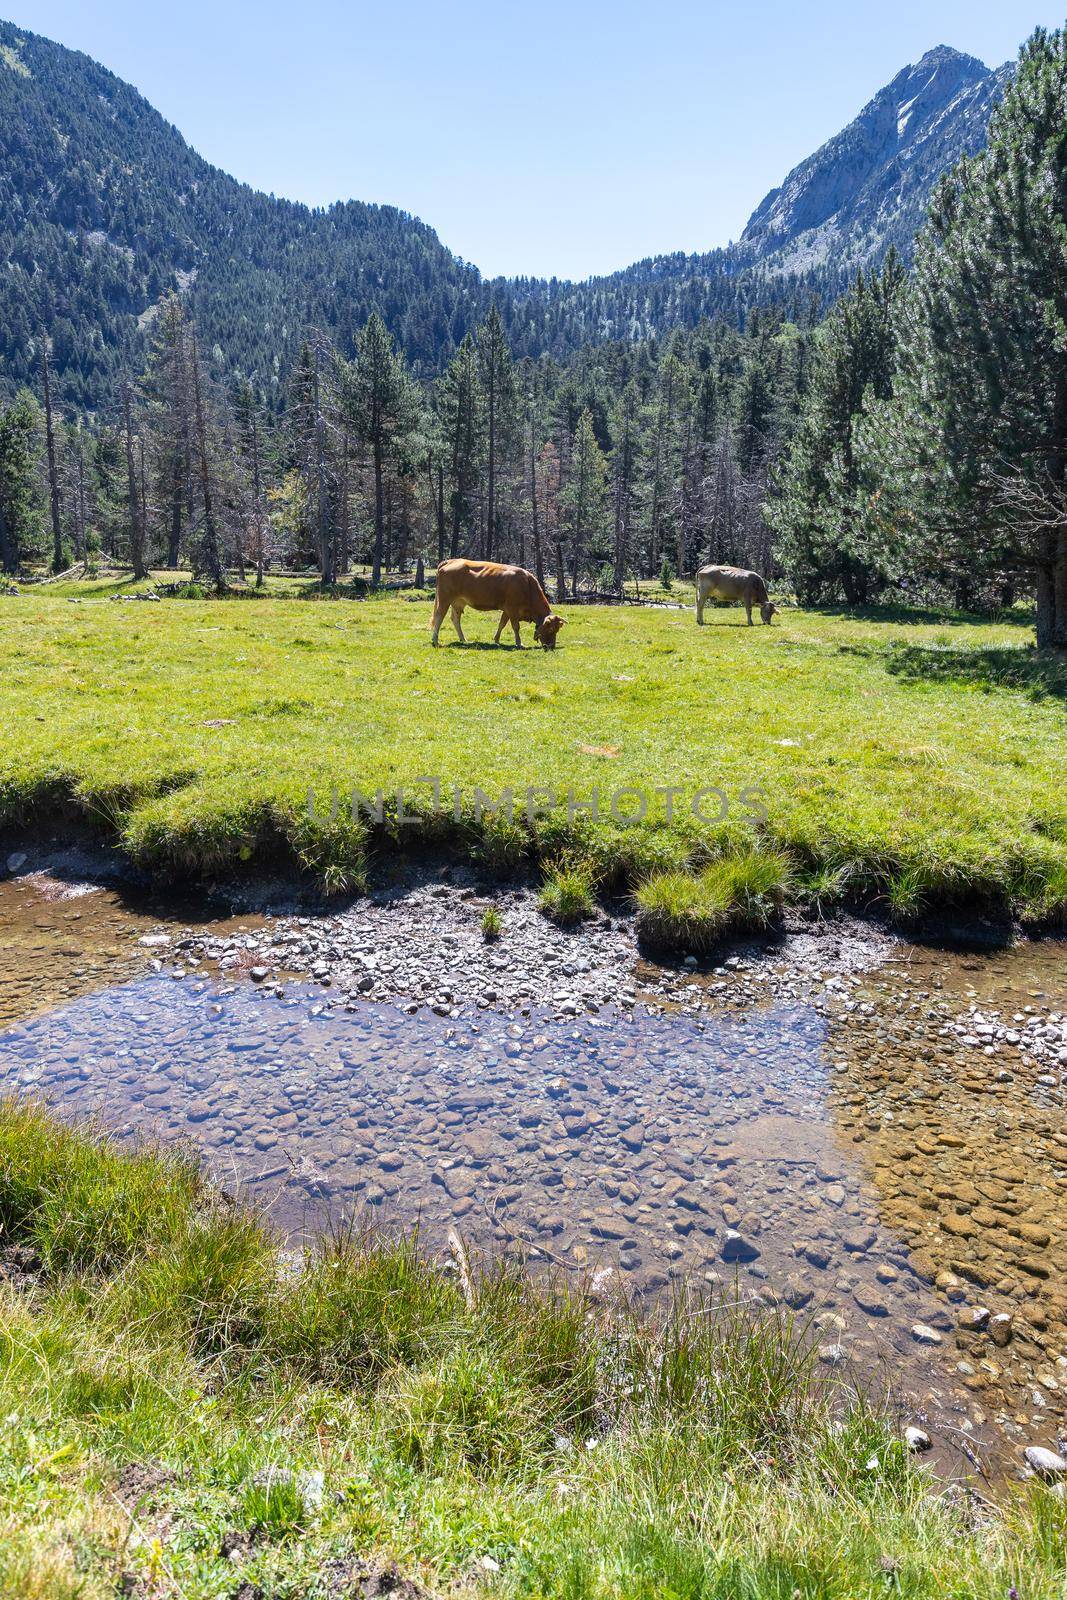 The beautiful Aiguestortes i Estany de Sant Maurici National Park of the Spanish Pyrenees mountain in Catalonia, cows on the mountain pasture by Digoarpi